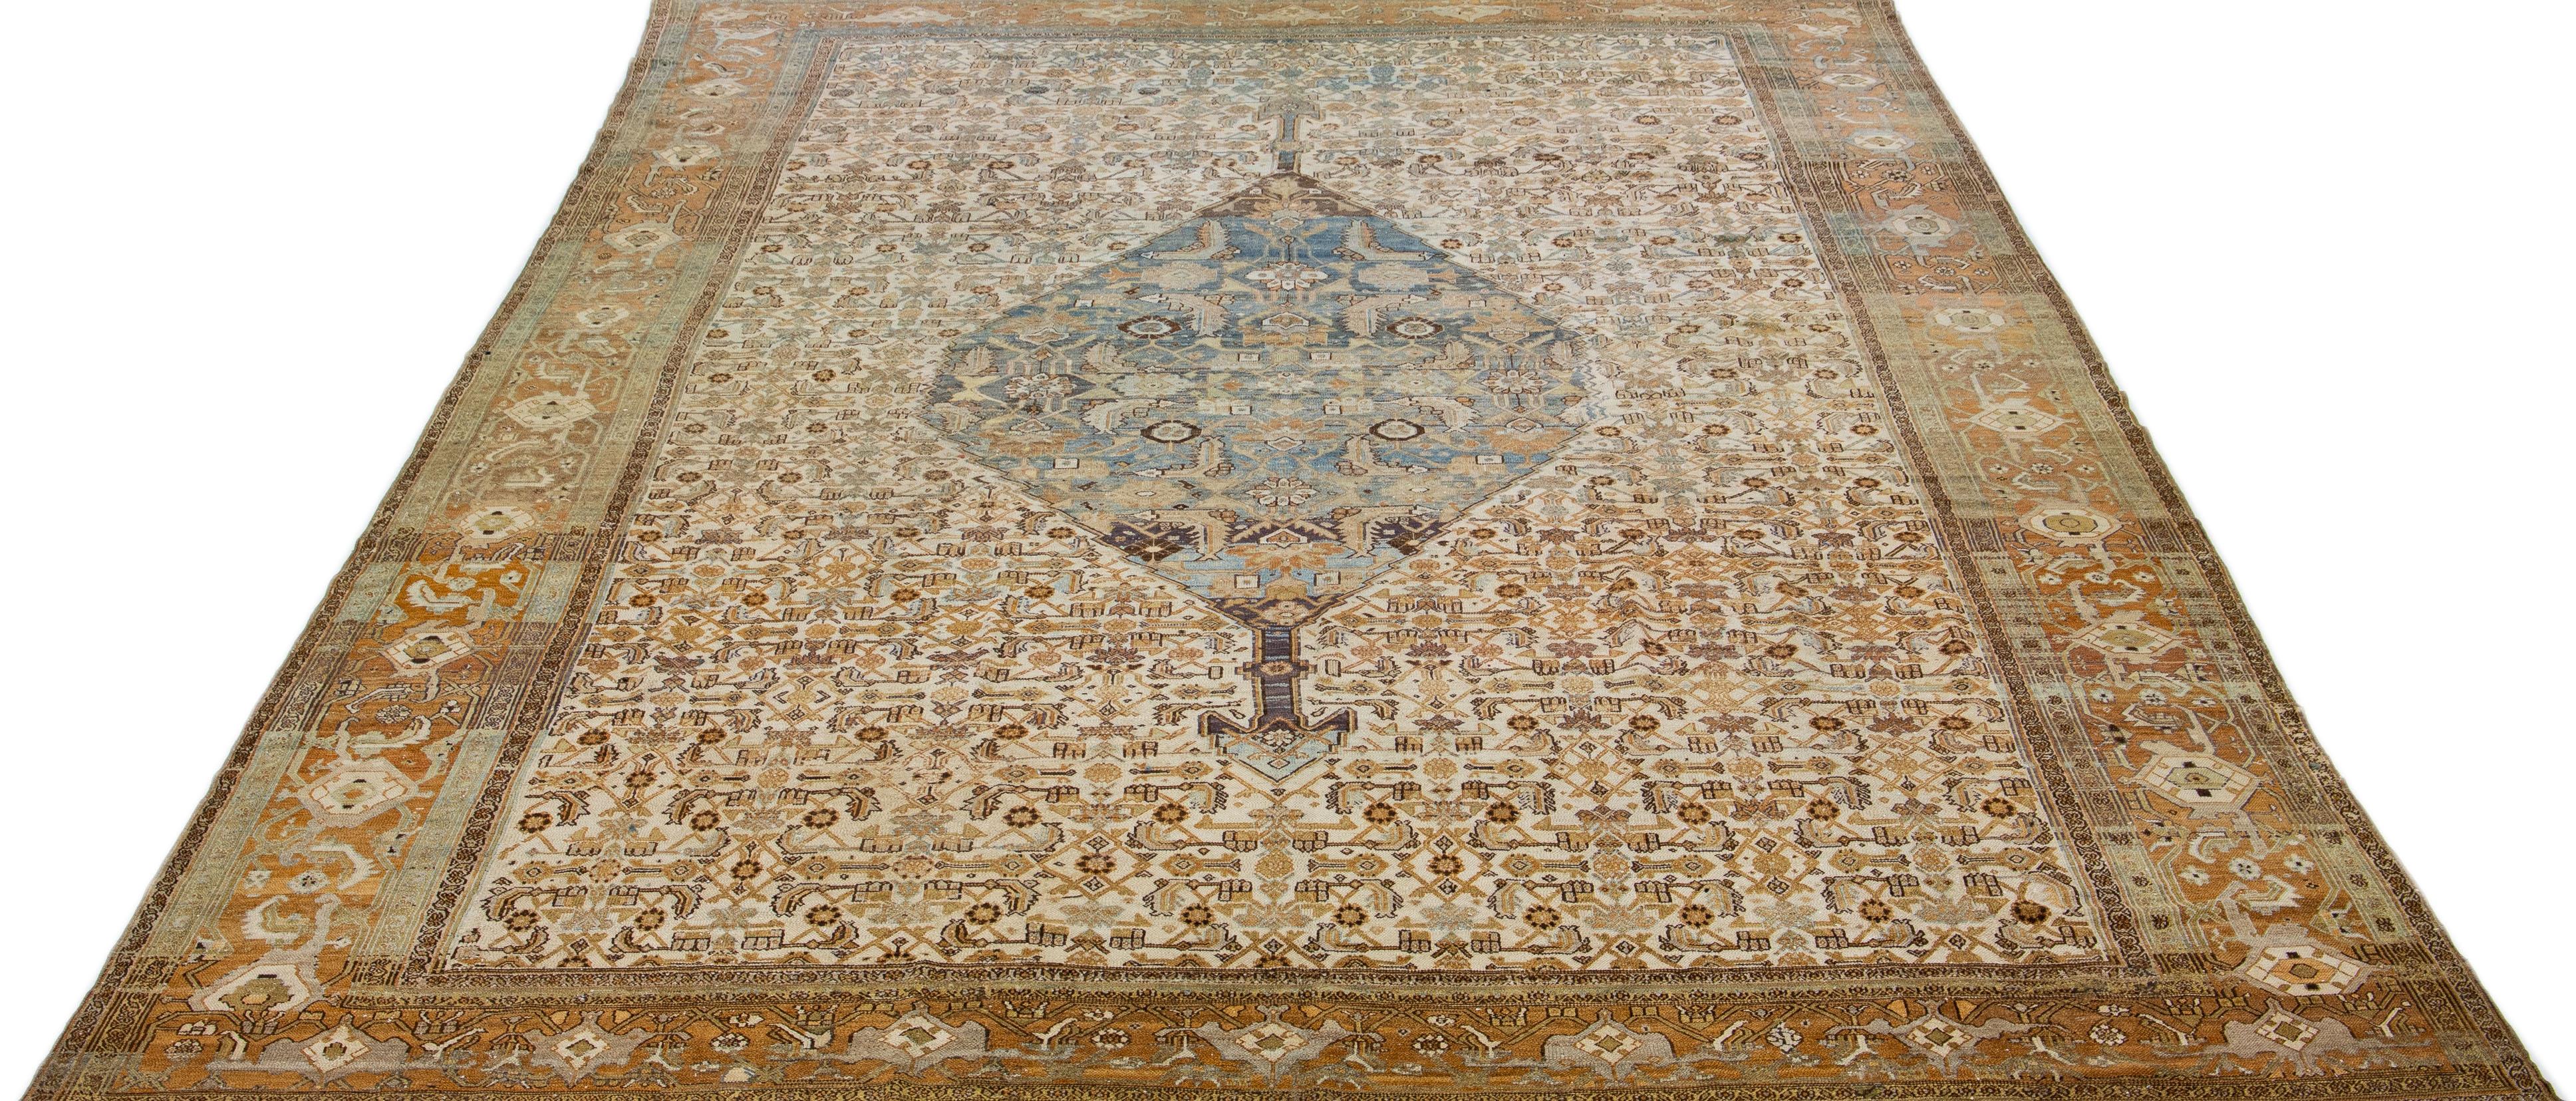 Allover Handmade 1900s Persian Malayer Wool Rug In Beige In Good Condition For Sale In Norwalk, CT